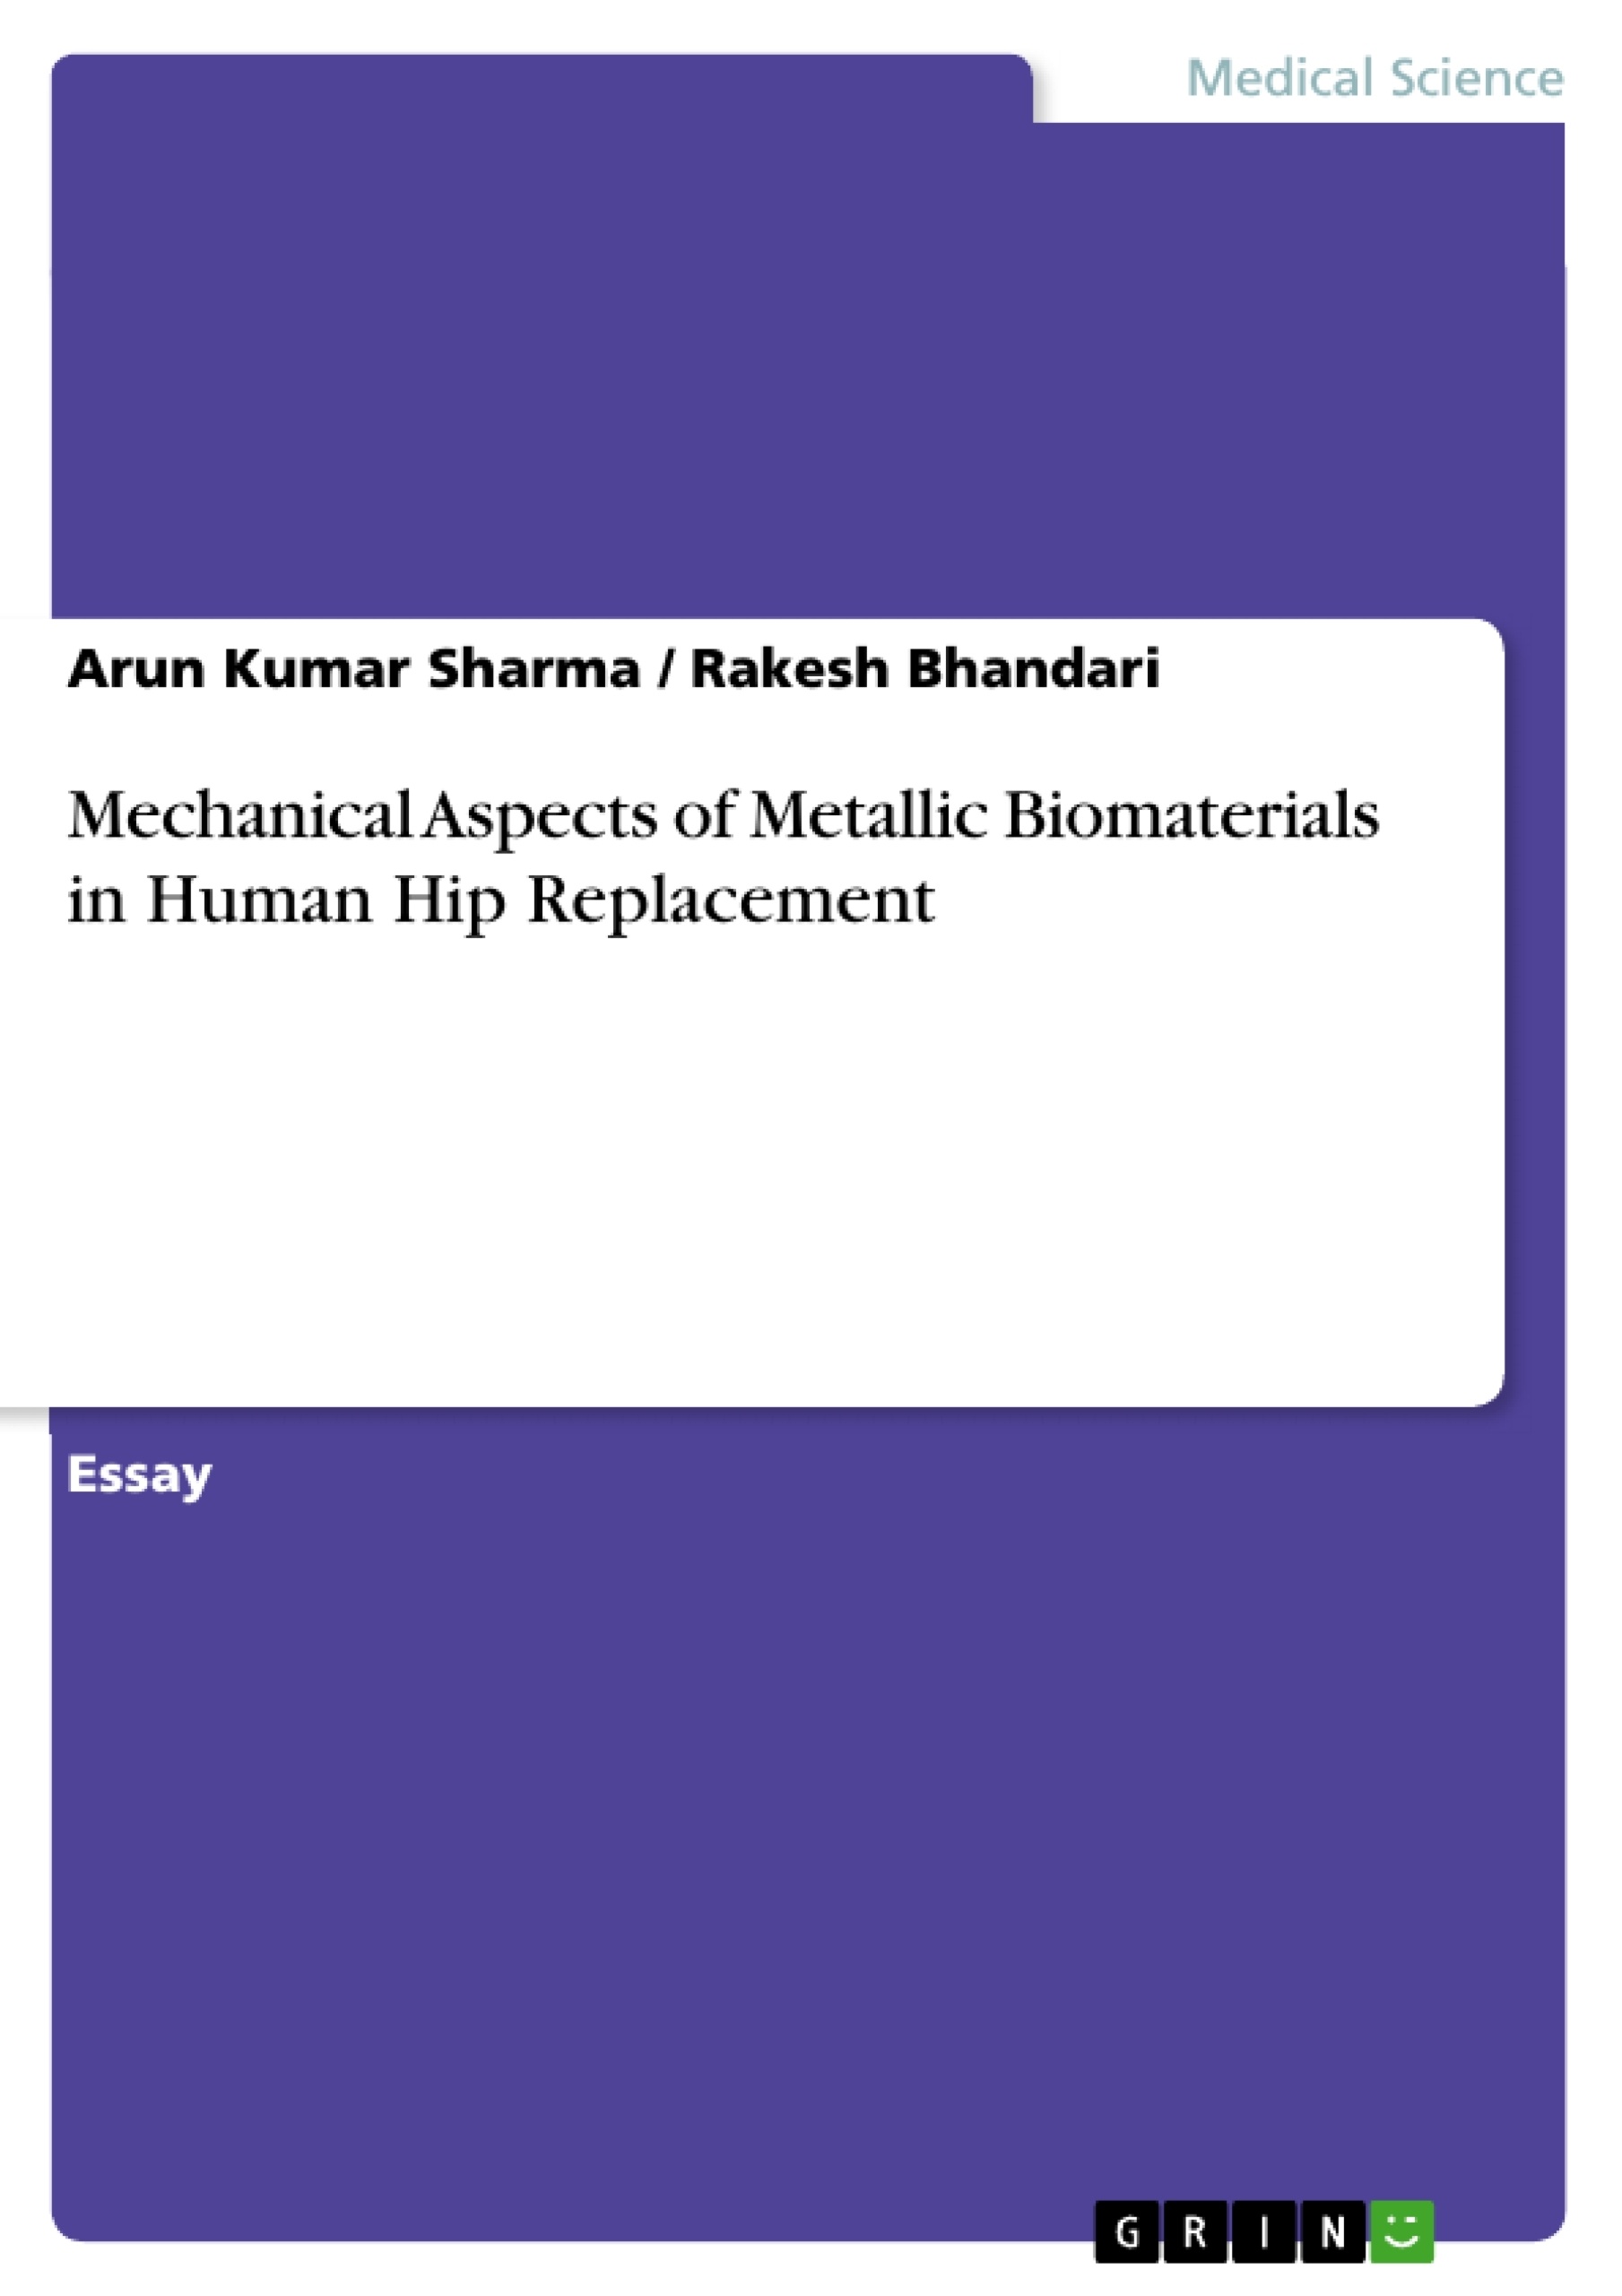 Titre: Mechanical Aspects of Metallic Biomaterials in Human Hip Replacement